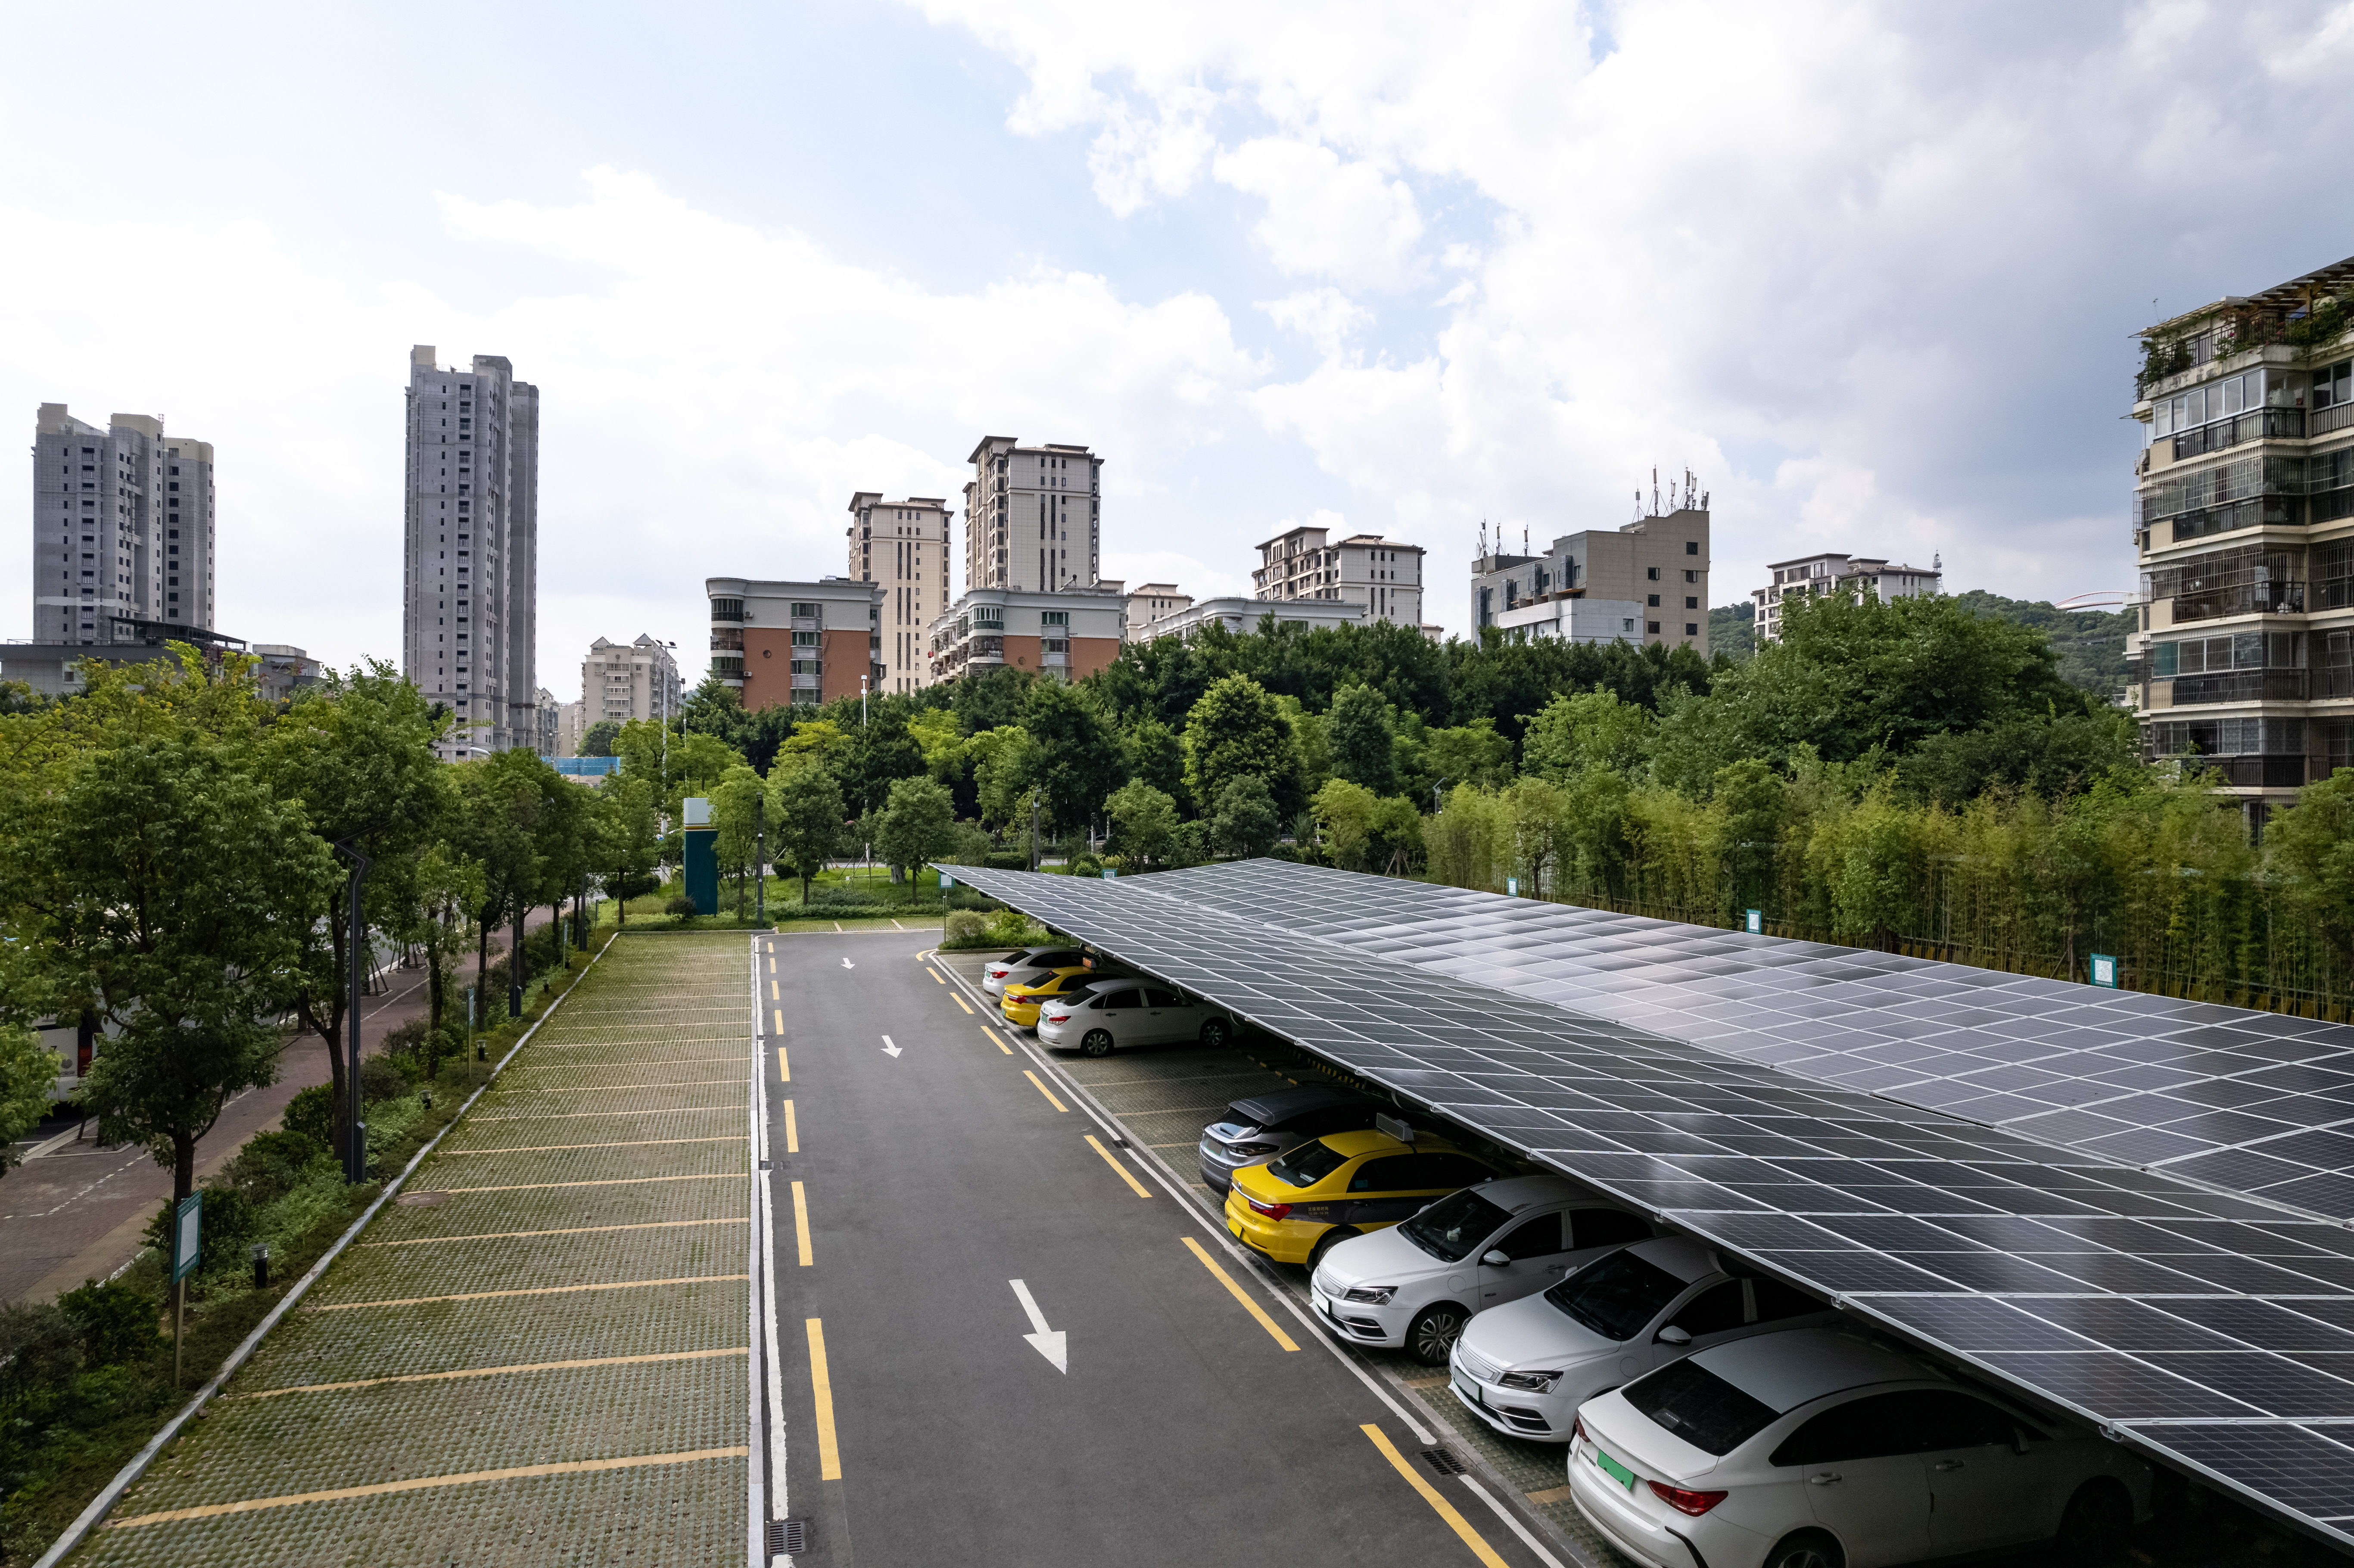 Urban parking lot with solar panels on the roof